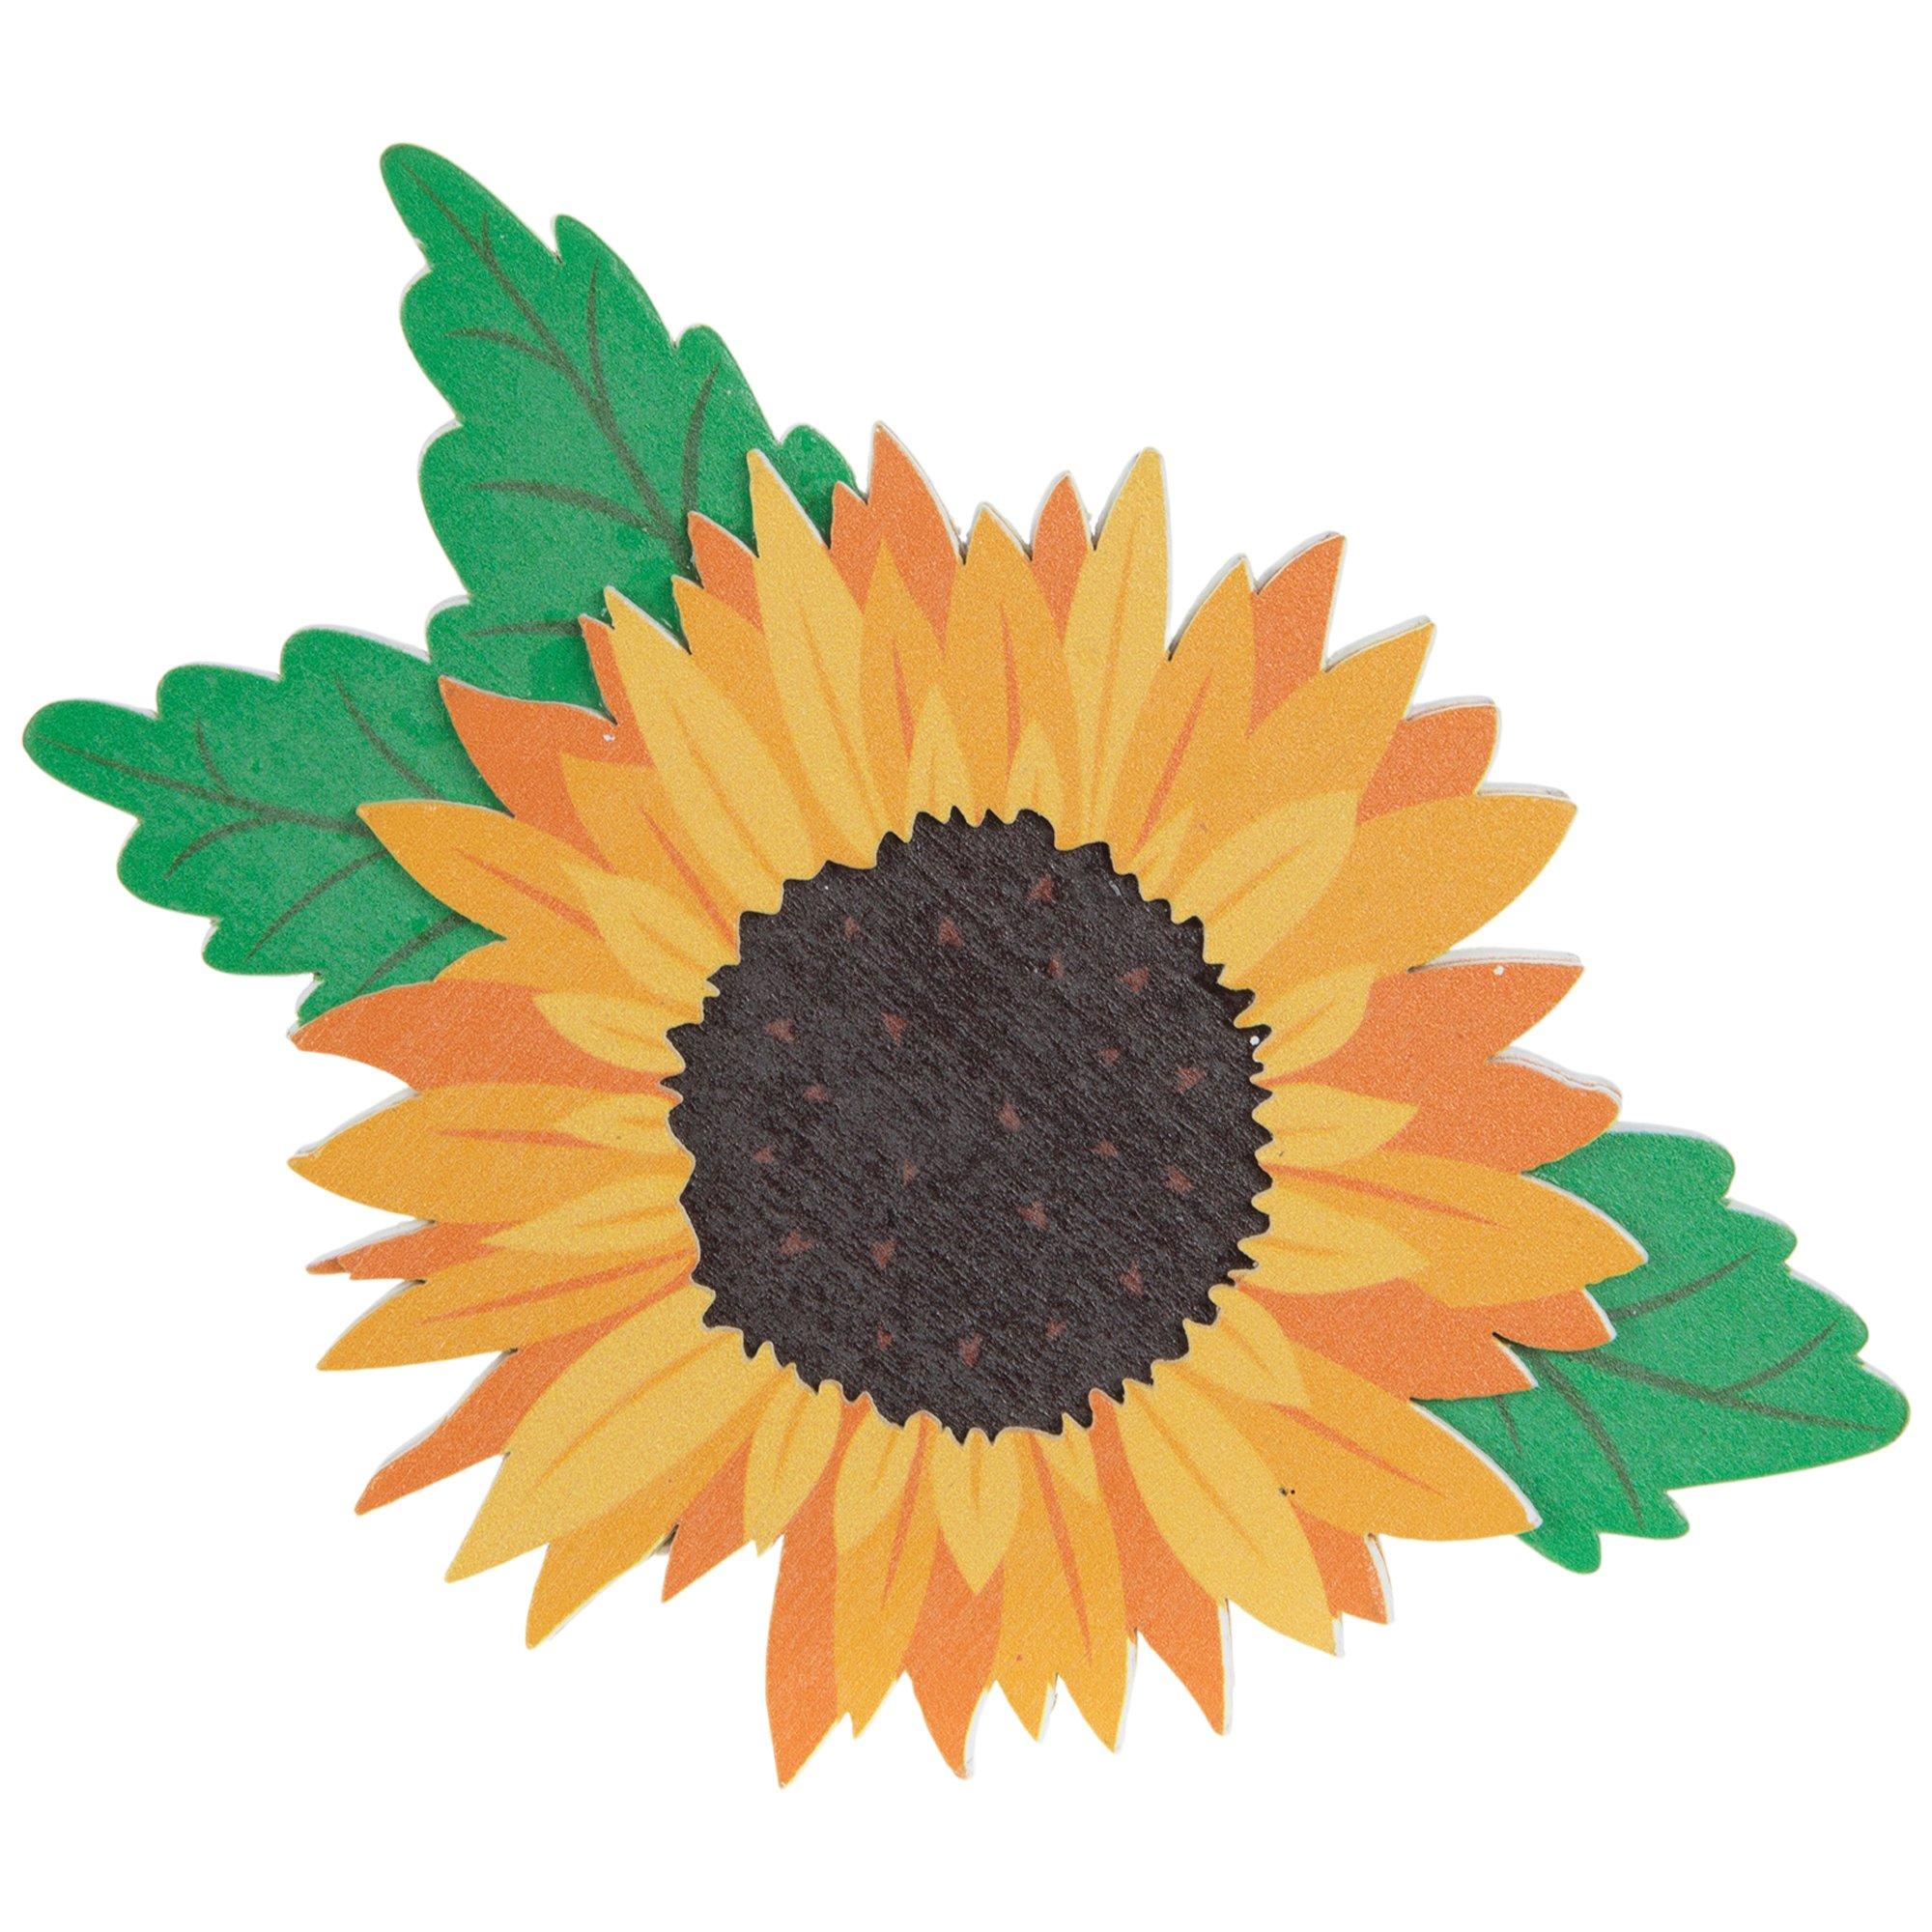 Wooden Decorative Cutting Board Hand Painted Sunflower Wall